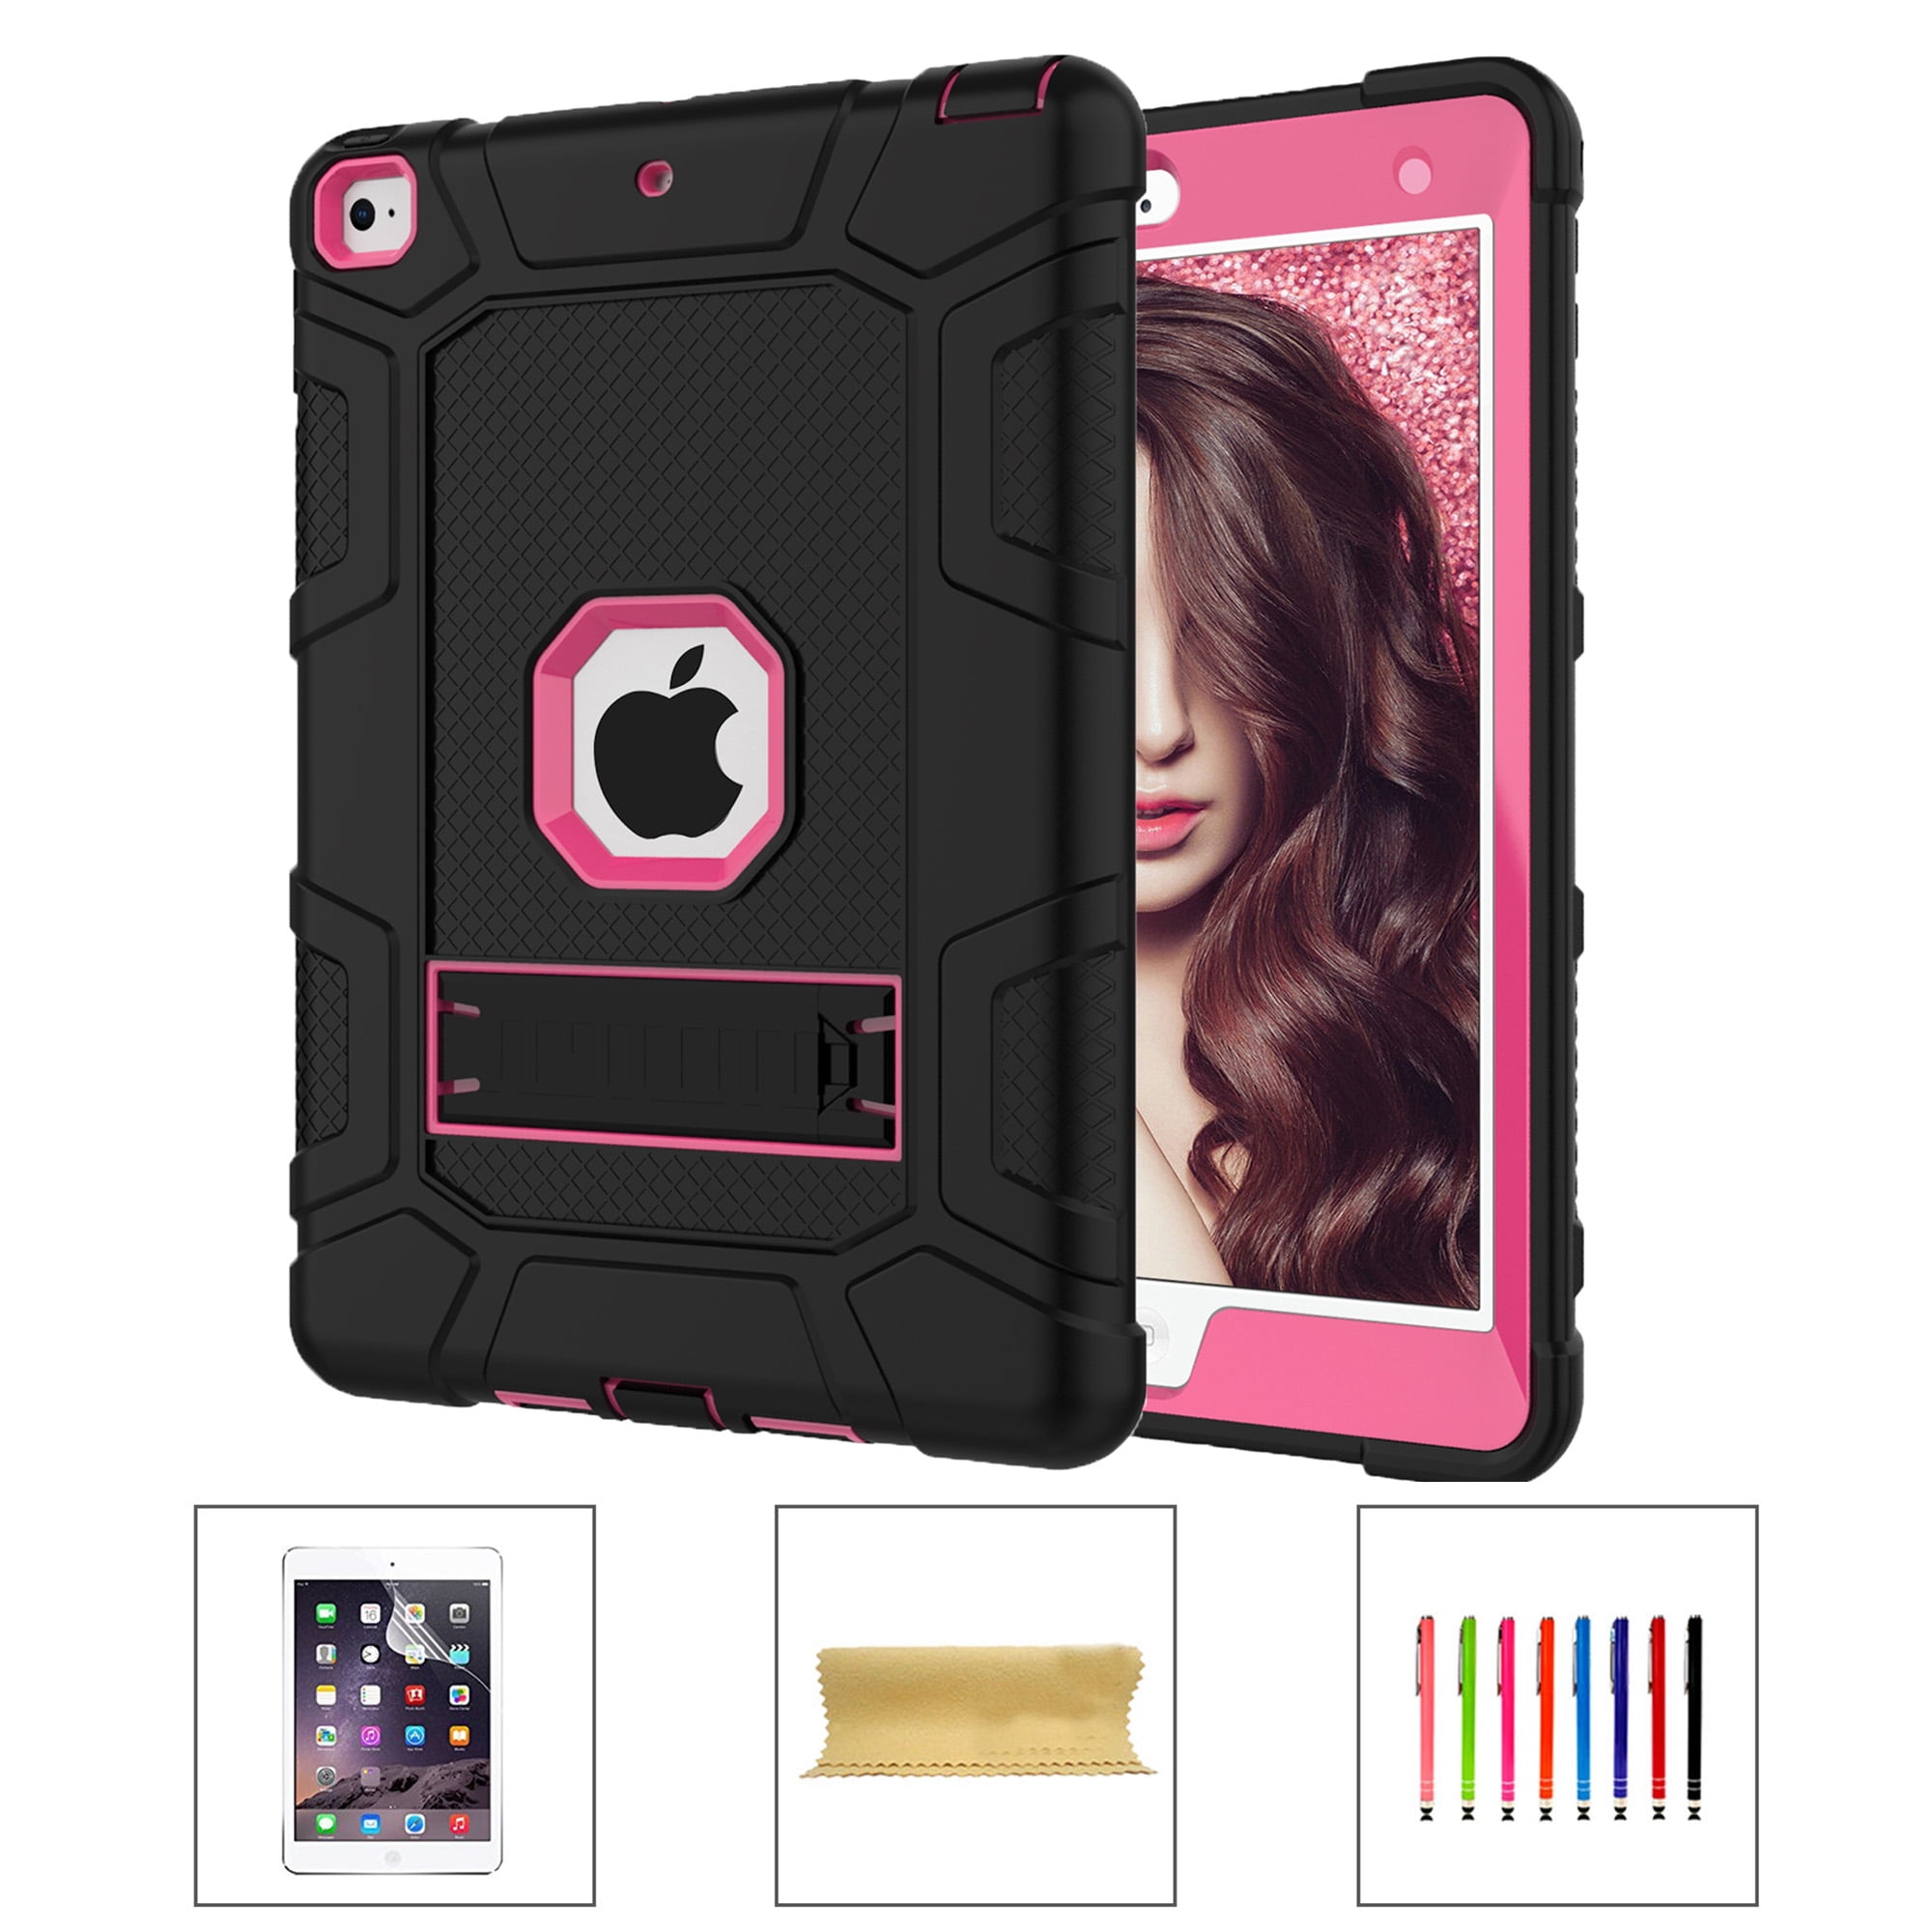 iPad 6th Generation Cases, iPad 2018 Case, iPad 9.7 Inch Case,Hybrid Shockproof Rugged Drop Protection Cover Built Kickstand with PET Screen Protector For iPad 9.7 inch A1893/A1954/A1822/A1823 - Walmart.com